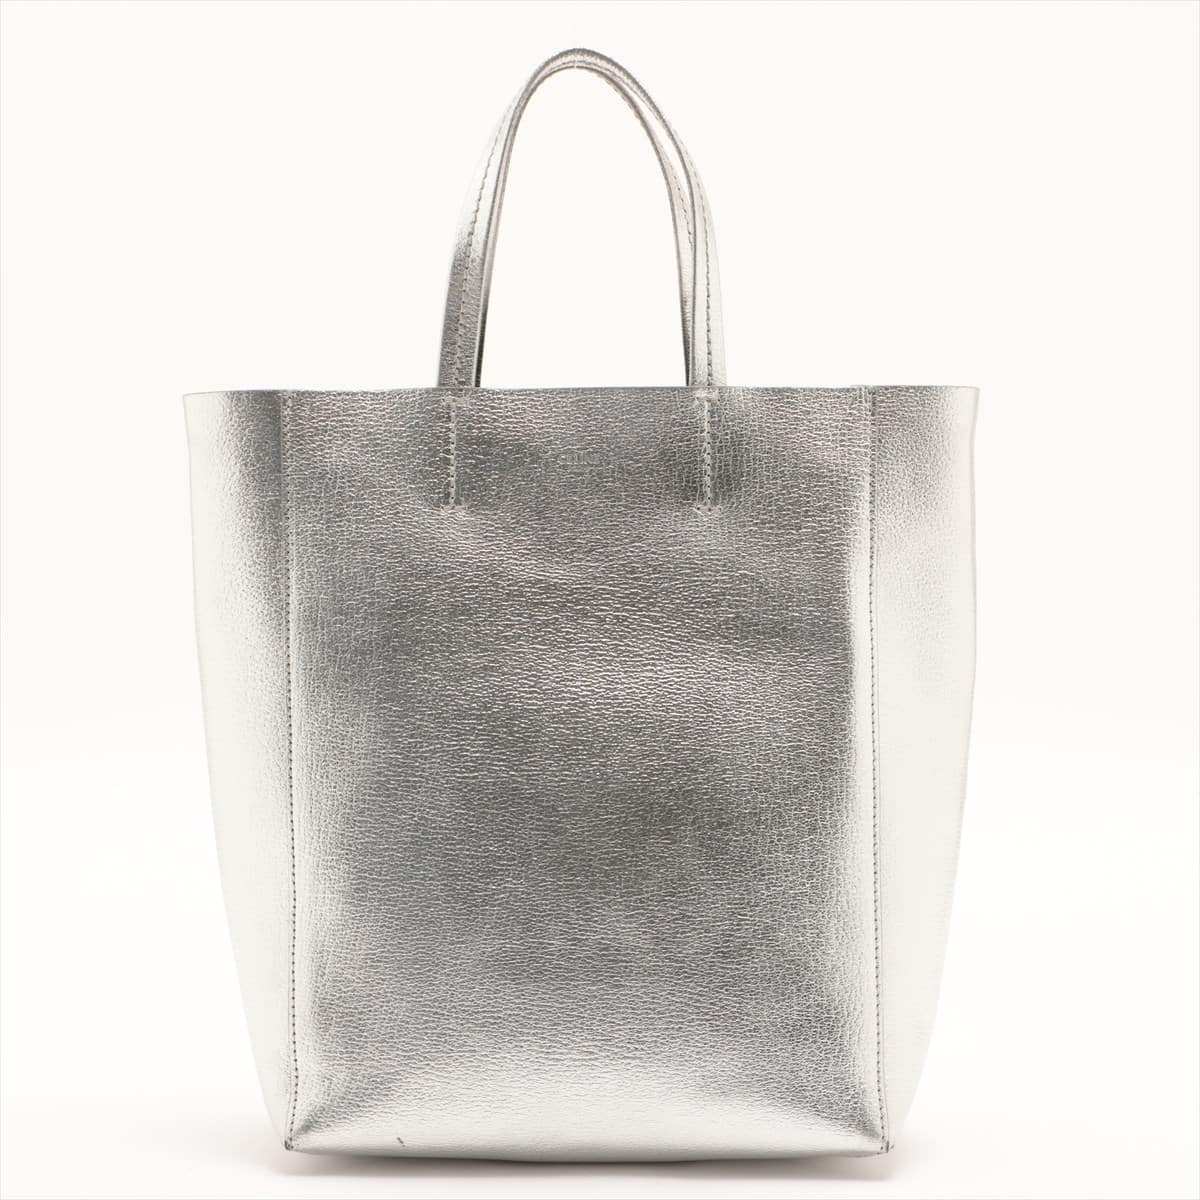 CELINE Vertical Cabas Small Leather 2 way tote bag Silver